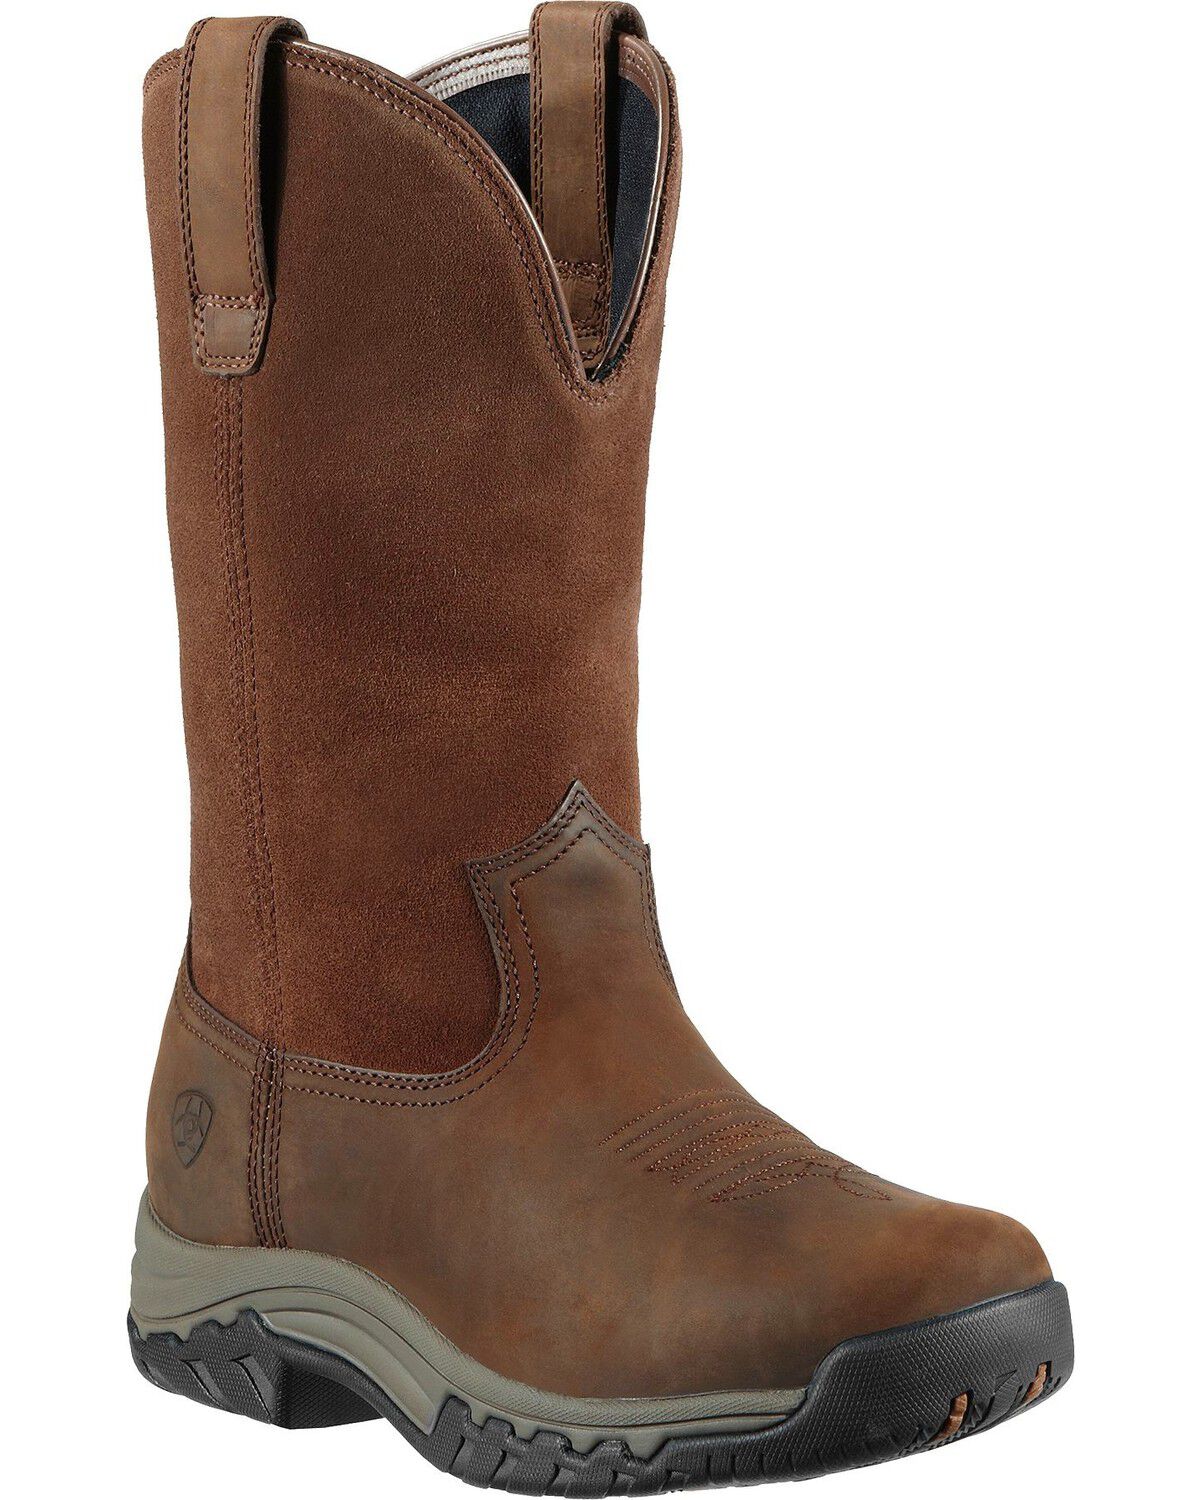 Terrain H2O Pull-On Boots - Round Toe 